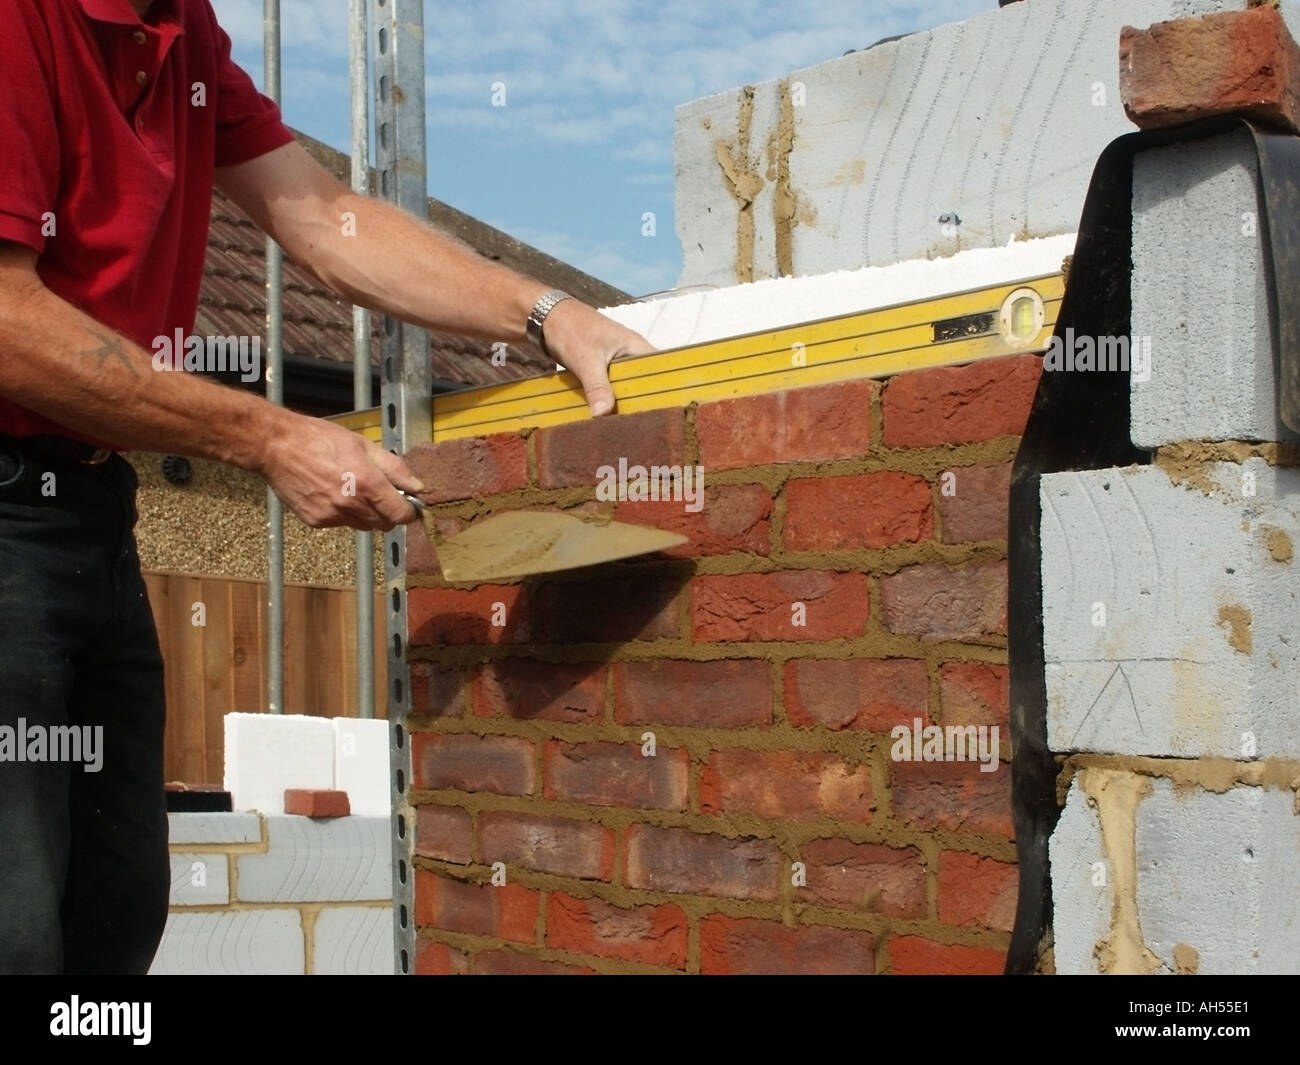 Building construction work in progress close up bricklayer using trowel & spirit level working on facing brick skin of cavity wall house building UK Stock Photo